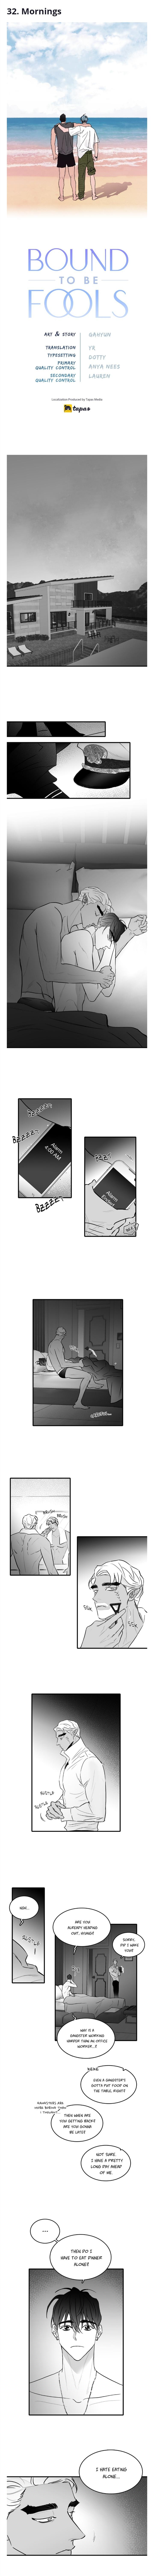 Bound To Be Fools - Page 1